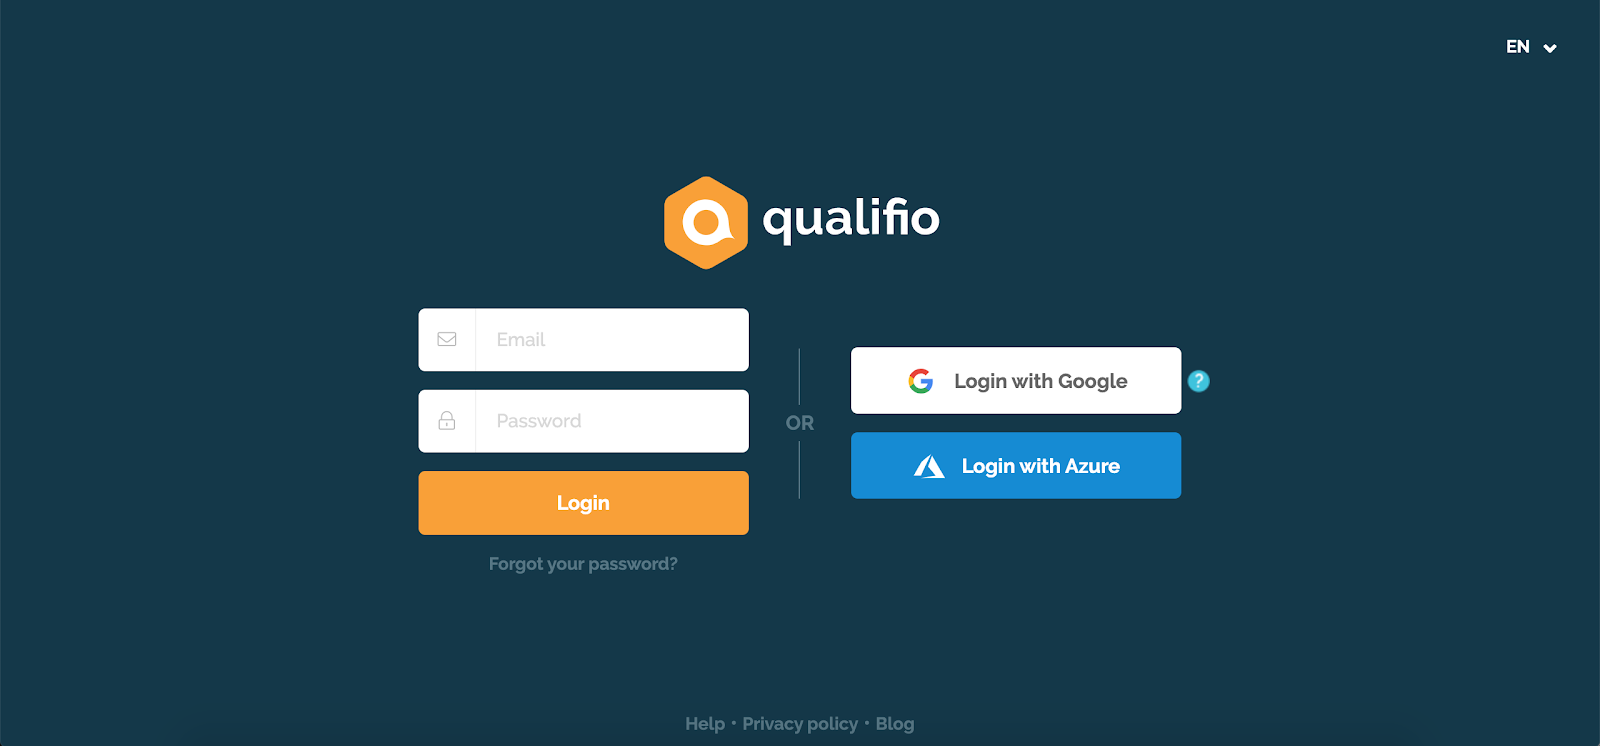 Qualifio's login page with SSO